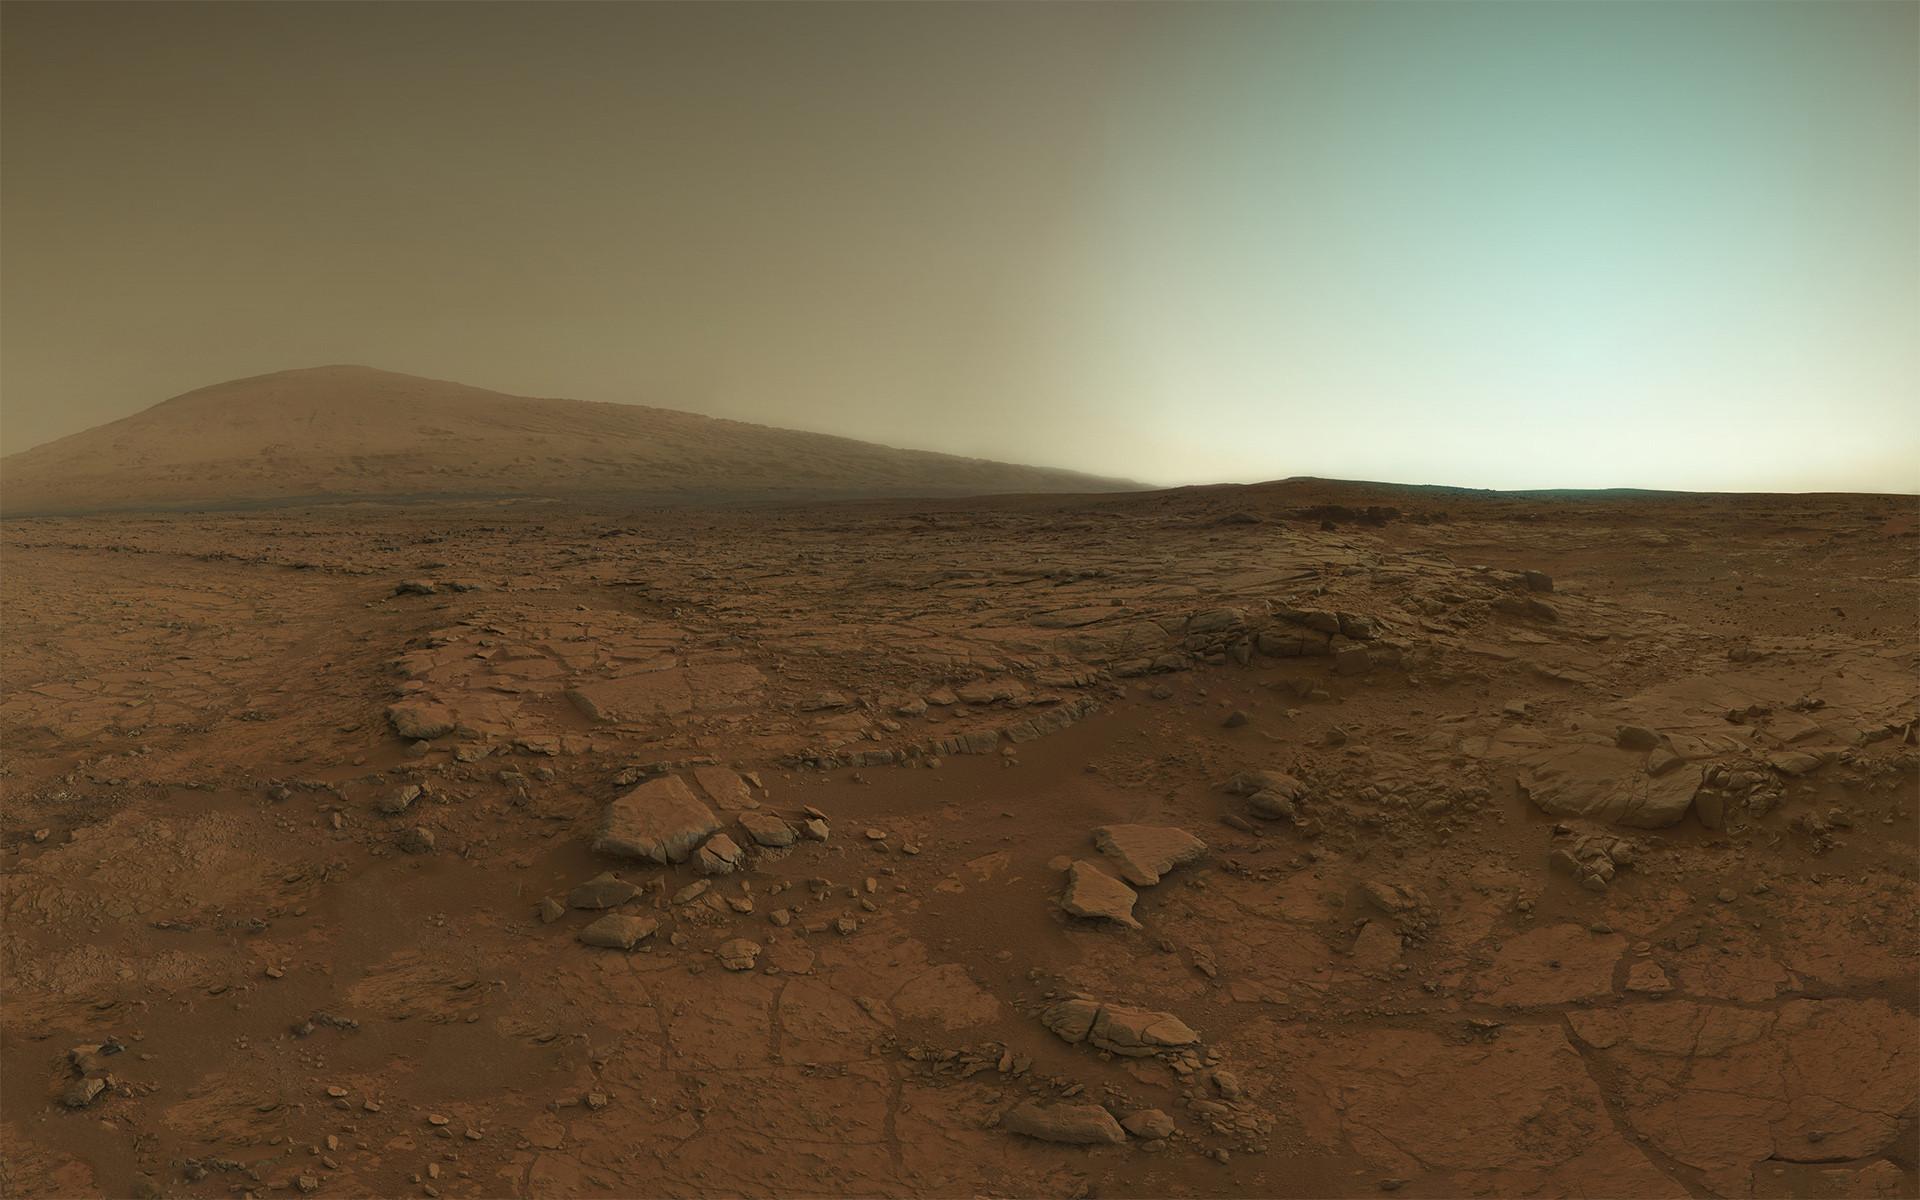 The surface of Mars, as seen by the Curiosity Rover. 1920x1200